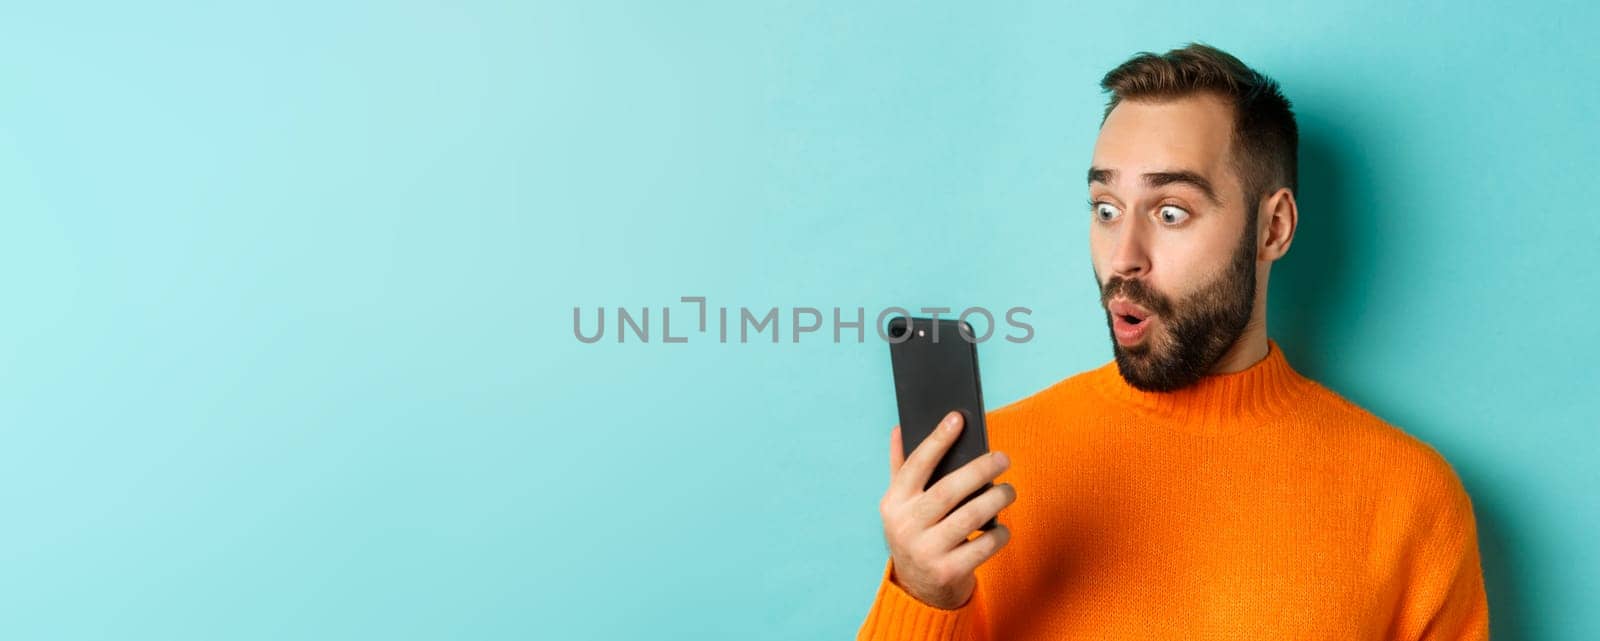 Close-up of caucasian man staring at phone screen with surprised face, wearing orange sweater, light blue background.